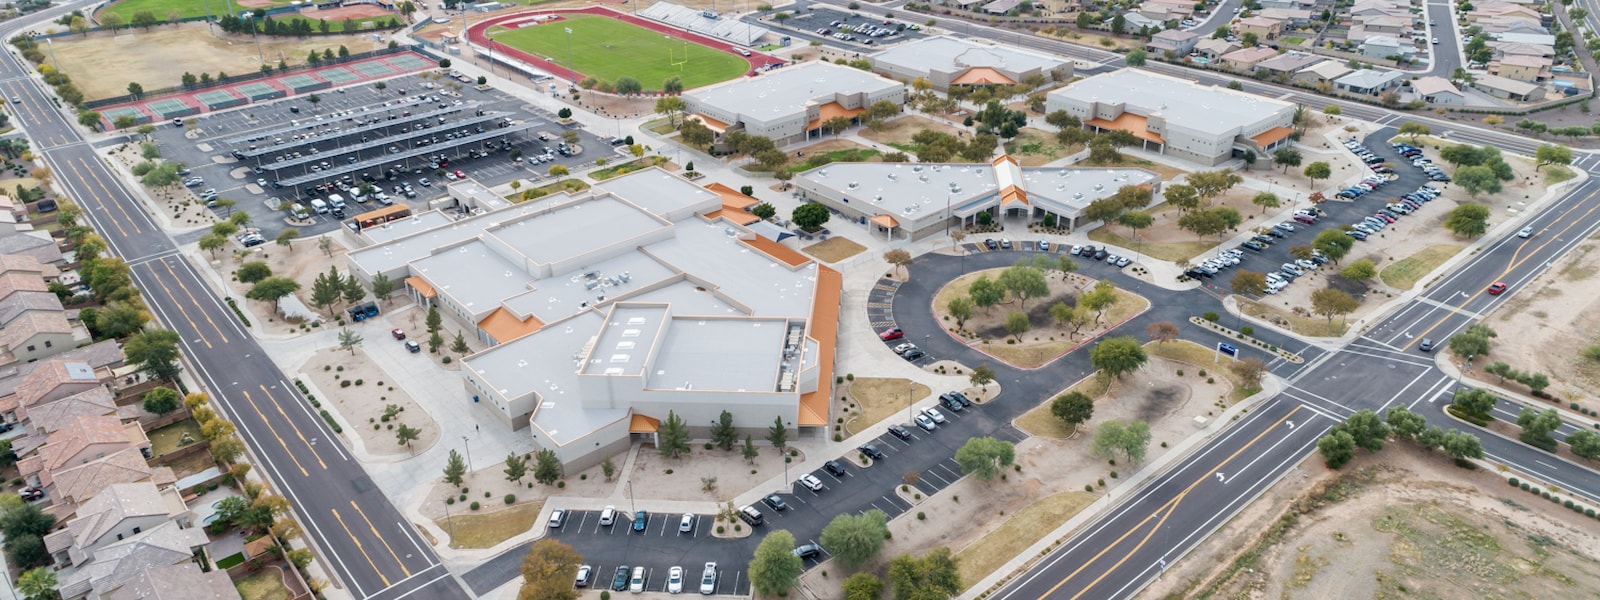 Aerial view of Willow Canyon High School